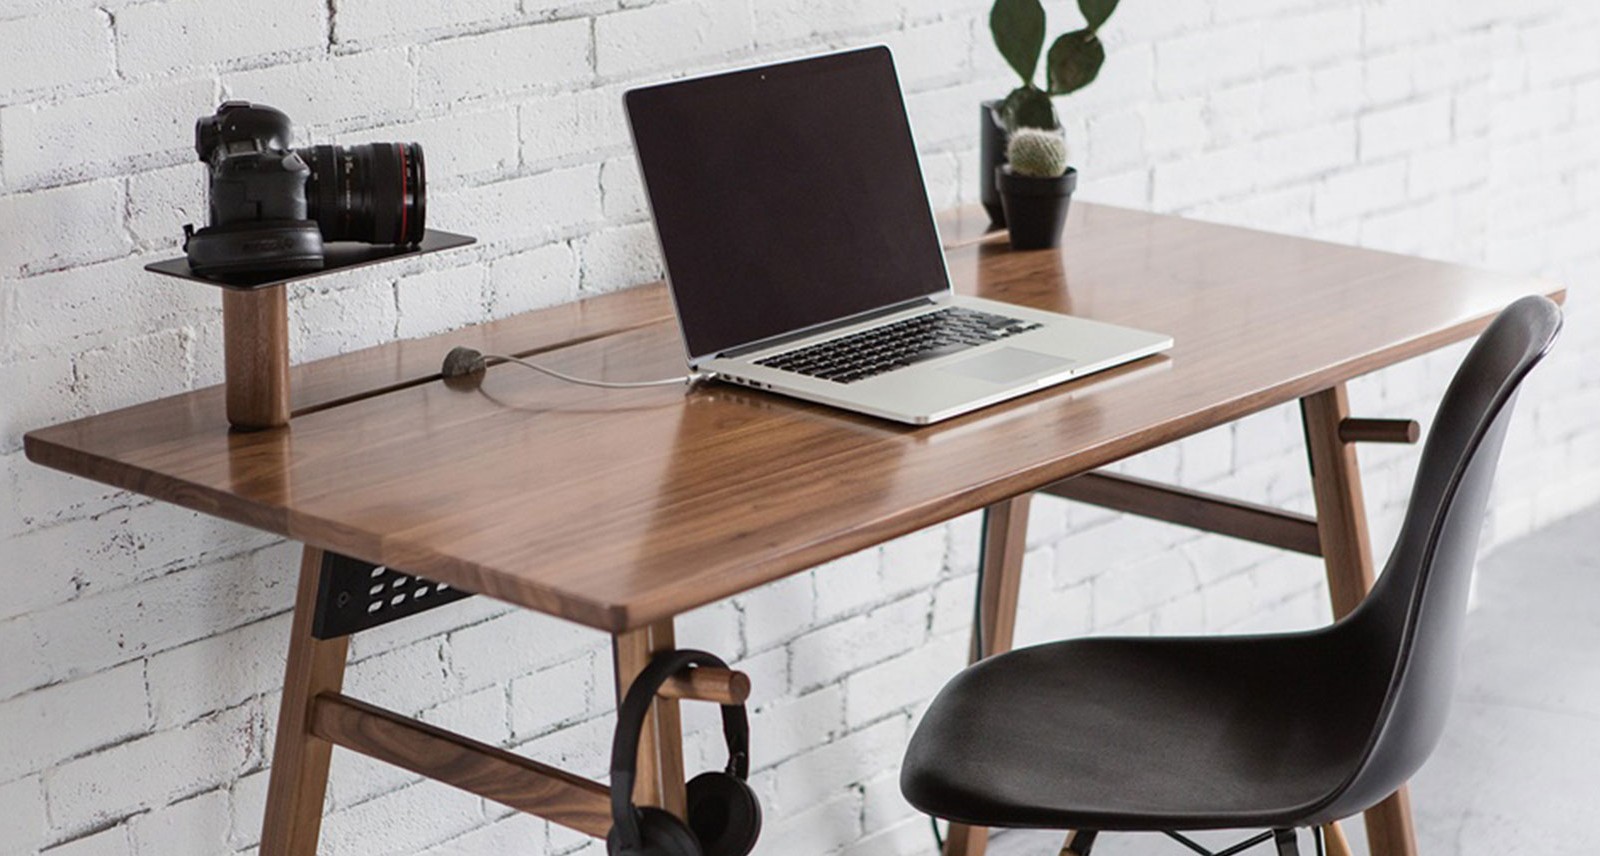 This Ingenious Desk Will Get You to Buckle Down and Actually Do Some Work